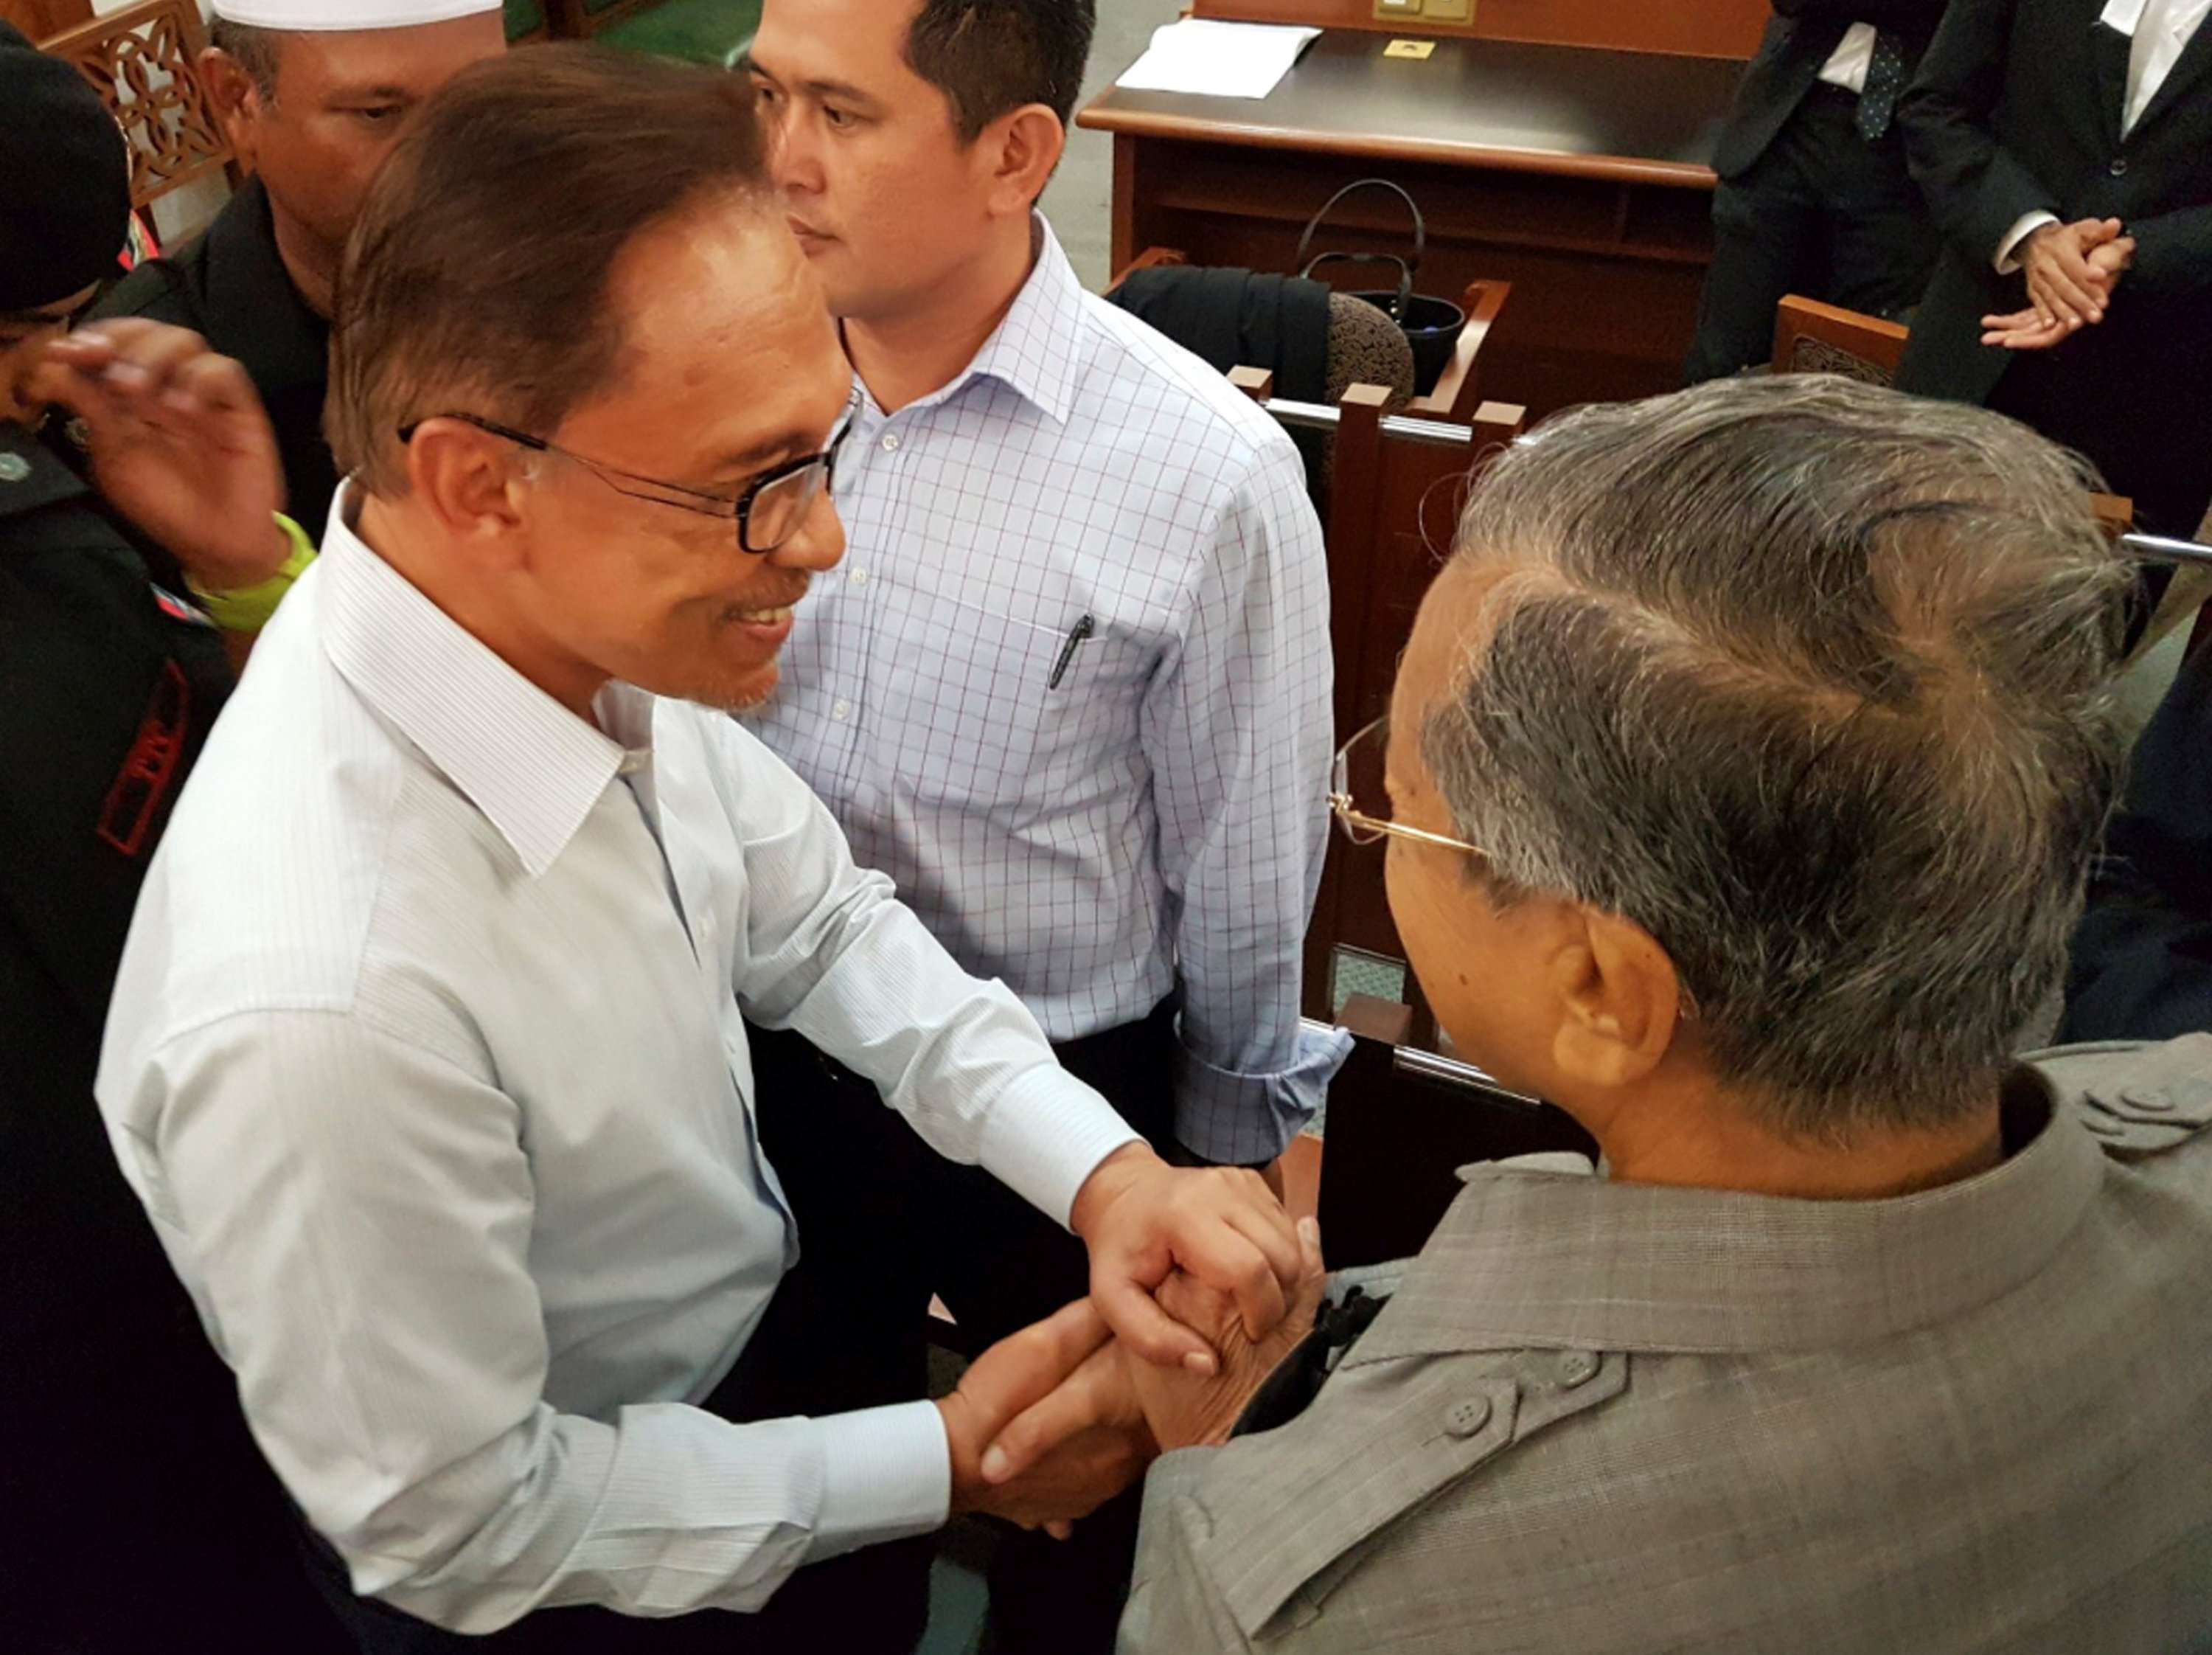 Malaysia's former prime minister Mahathir Mohamad (R) meets with jailed opposition leader Anwar Ibrahim in a high court in Kuala Lumpur September 5, 2016. Najwan Halimi/Handout via REUTERS FOR EDITORIAL USE ONLY. NO RESALES. NO ARCHIVES. MANDATORY CREDIT THIS PICTURE WAS PROCESSED BY REUTERS TO ENHANCE QUALITY. AN UNPROCESSED VERSION HAS BEEN PROVIDED SEPARATELY TPX IMAGES OF THE DAY